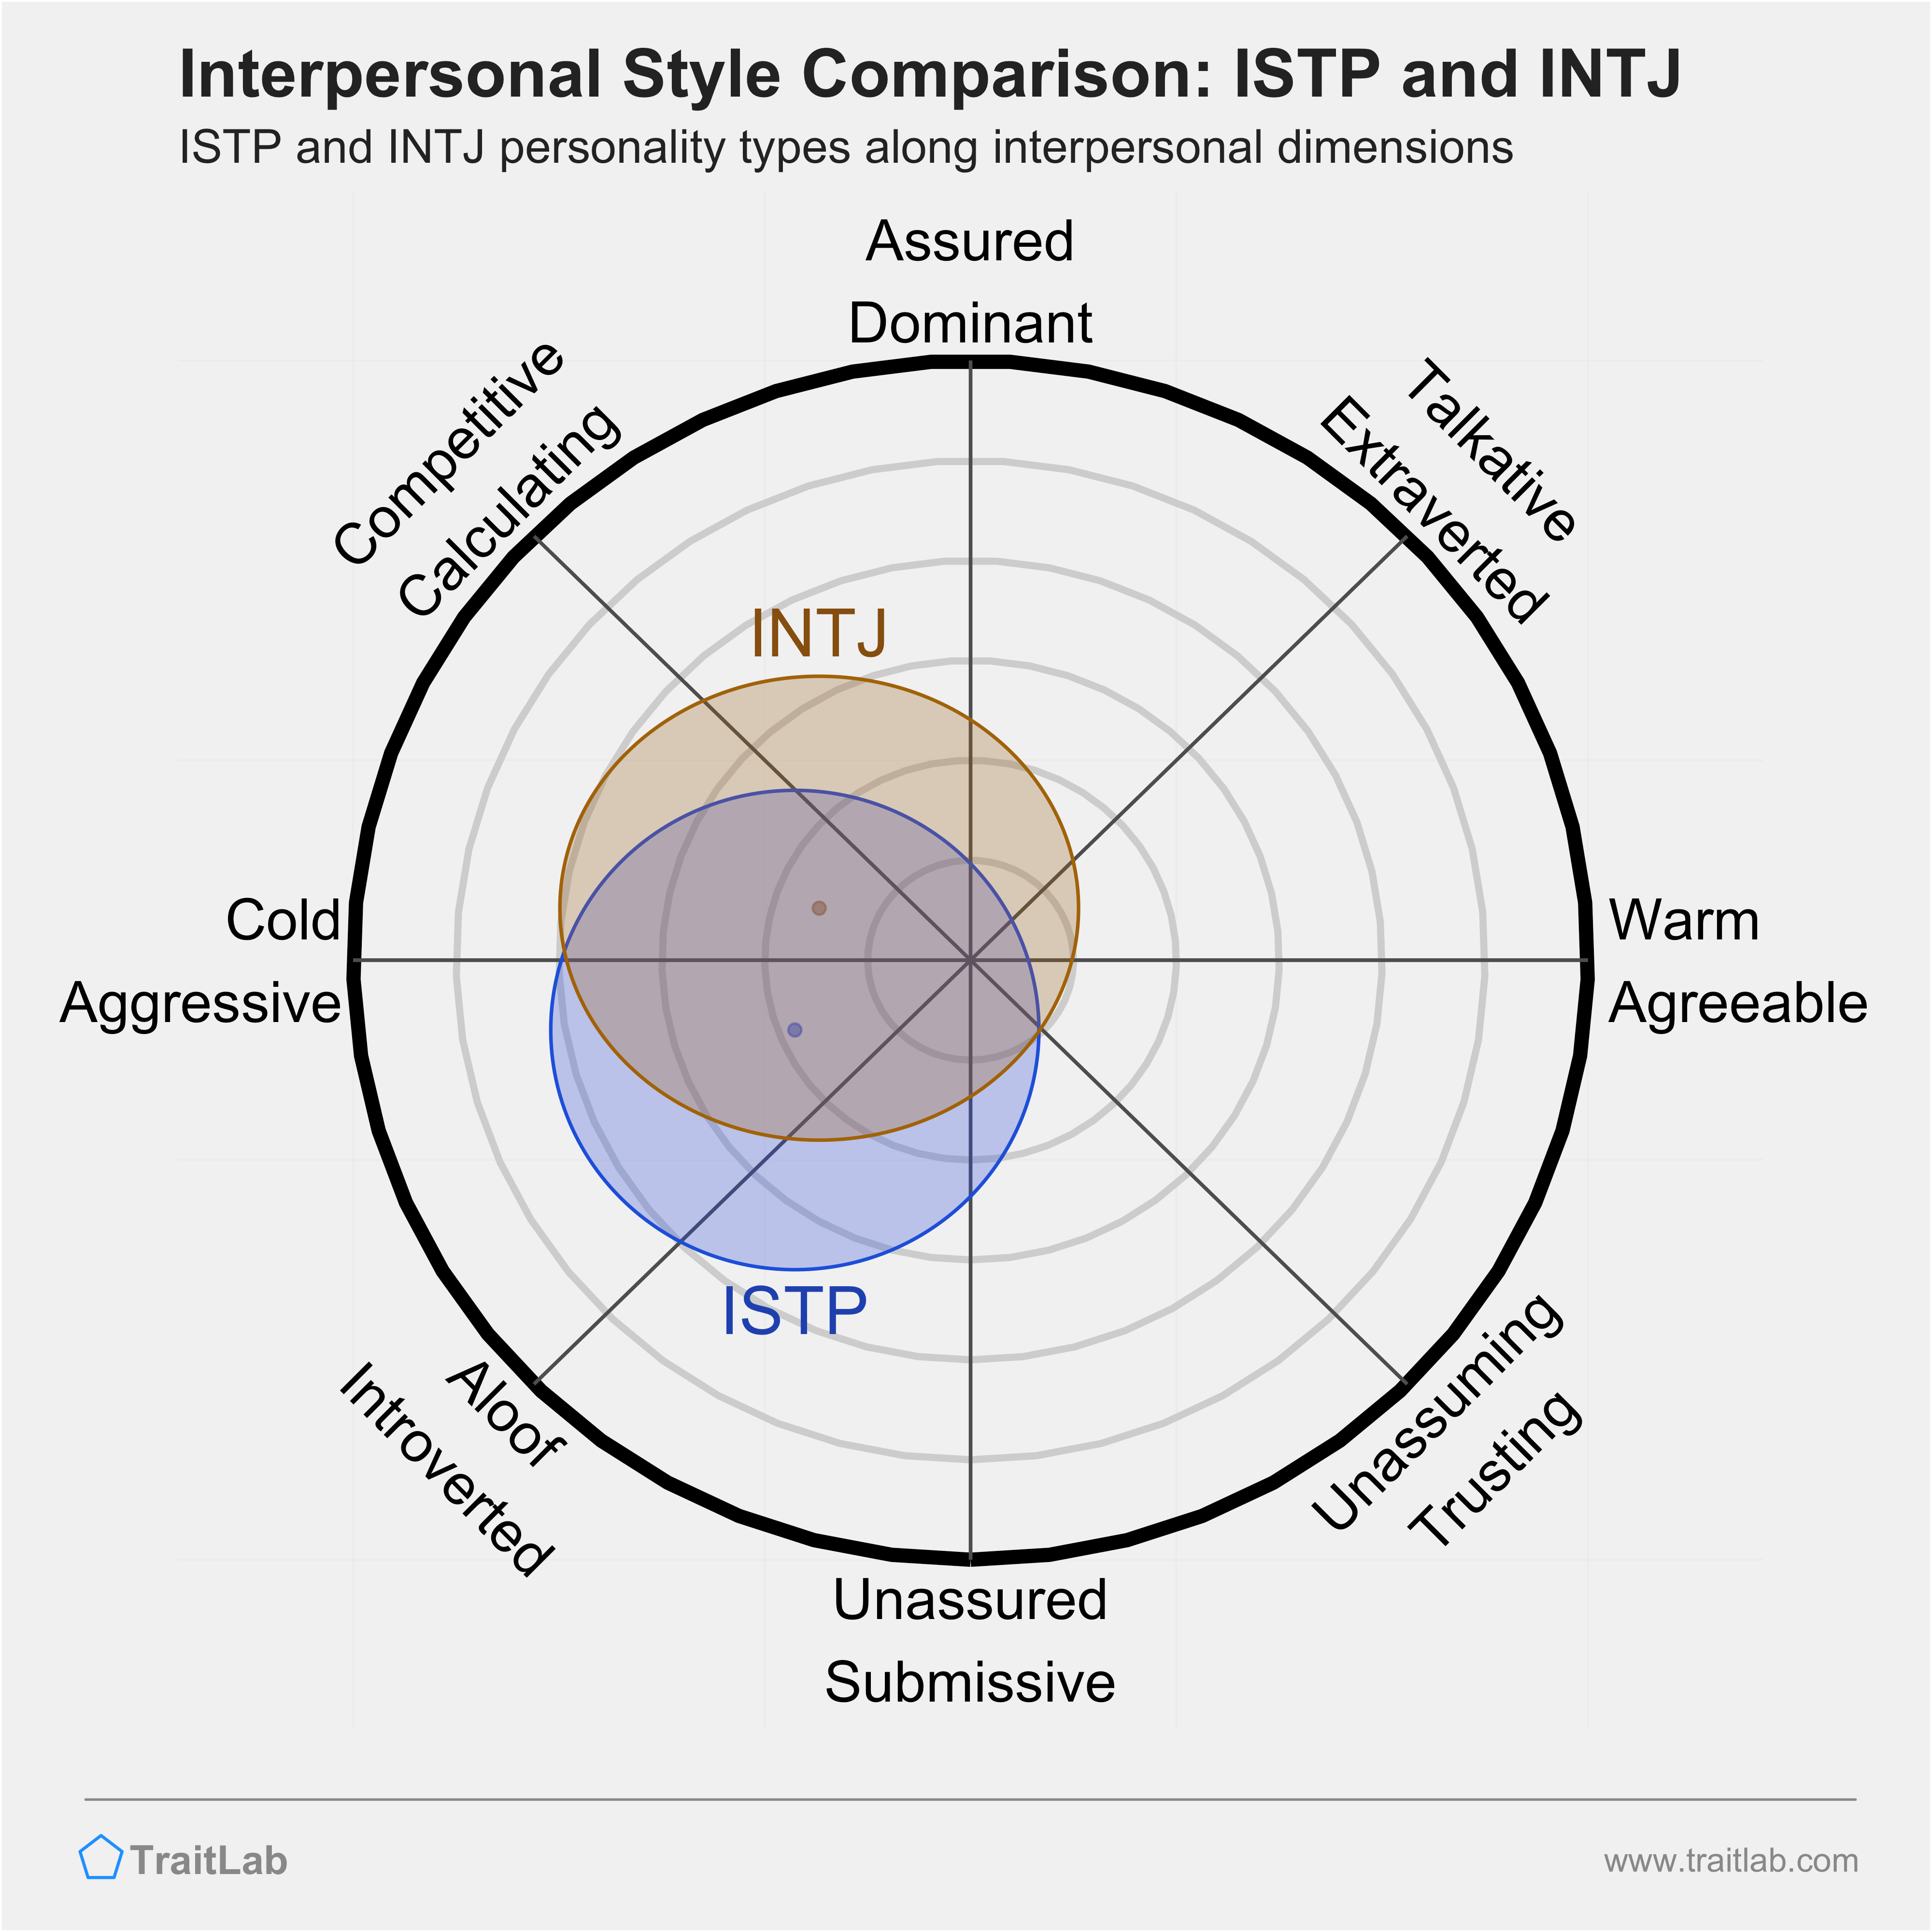 ISTP and INTJ comparison across interpersonal dimensions